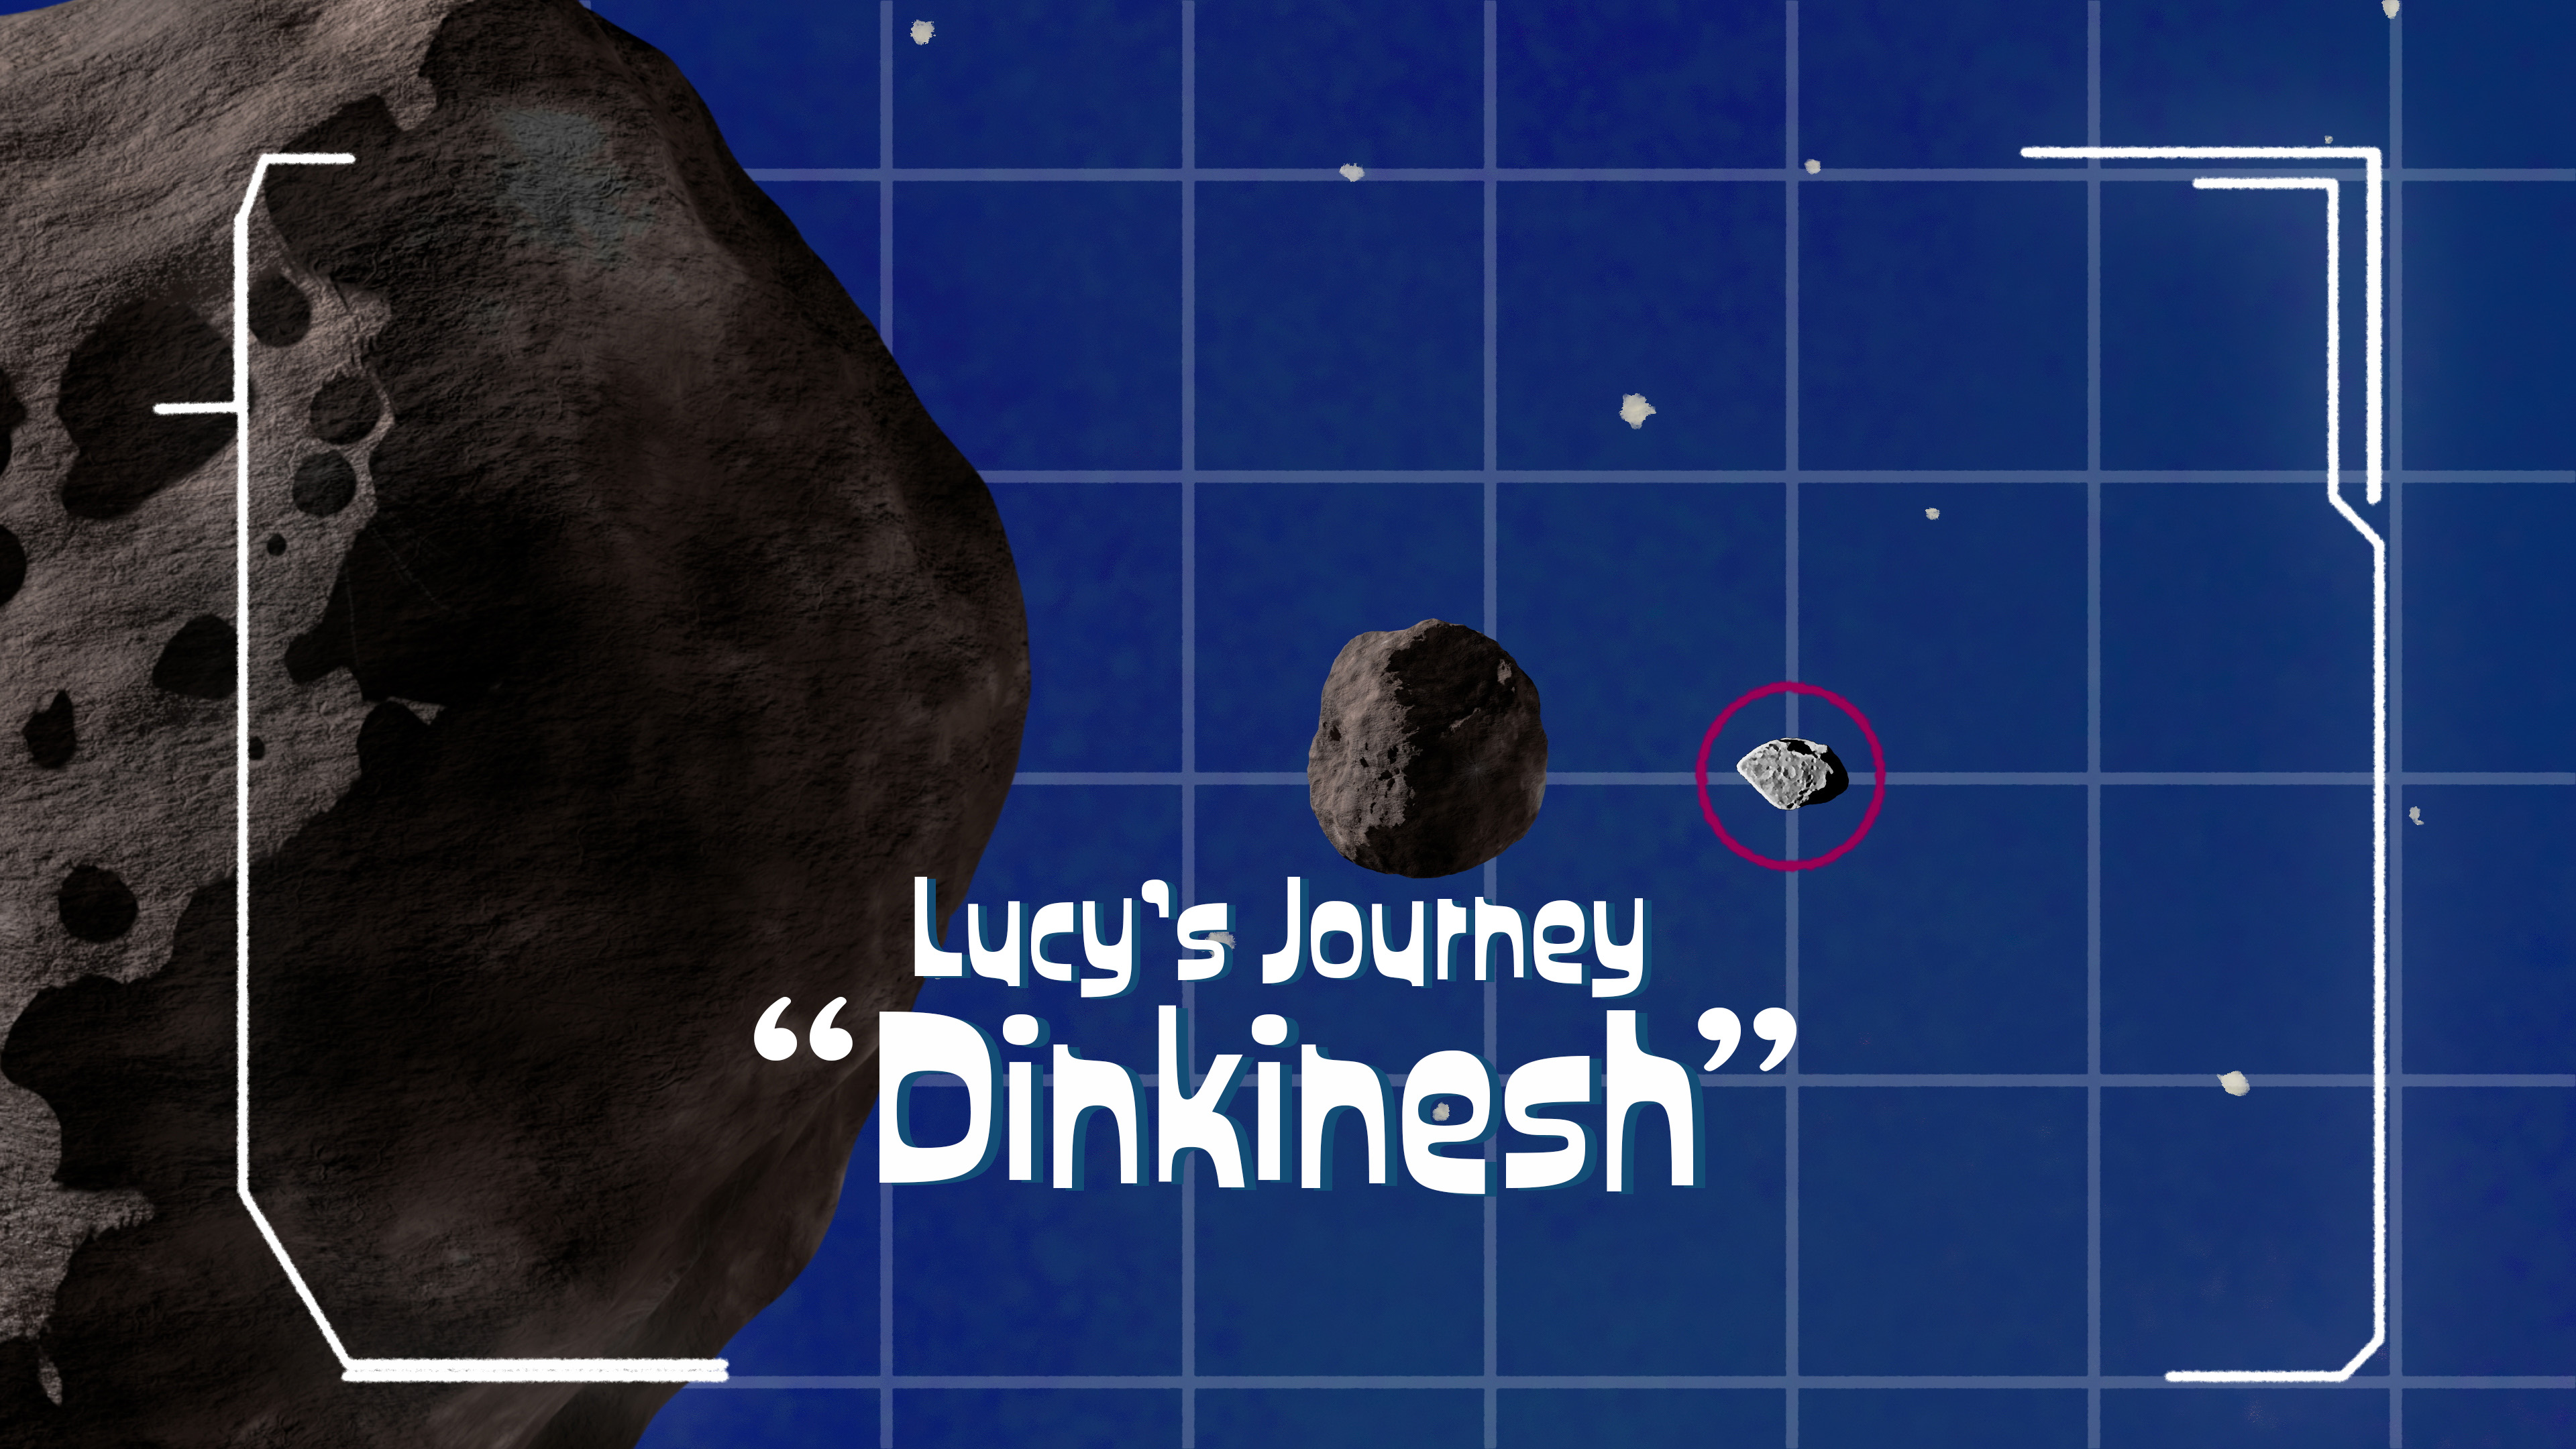 A large asteroid is shown at the left of the screen, with a smaller asteroid about a quarter of its size positioned in the middle. An even smaller asteroid is shown to the right, with a red circle around it. The text "Lucy's Journey 'Dinkinesh'" is shown beneath the middle asteroid.